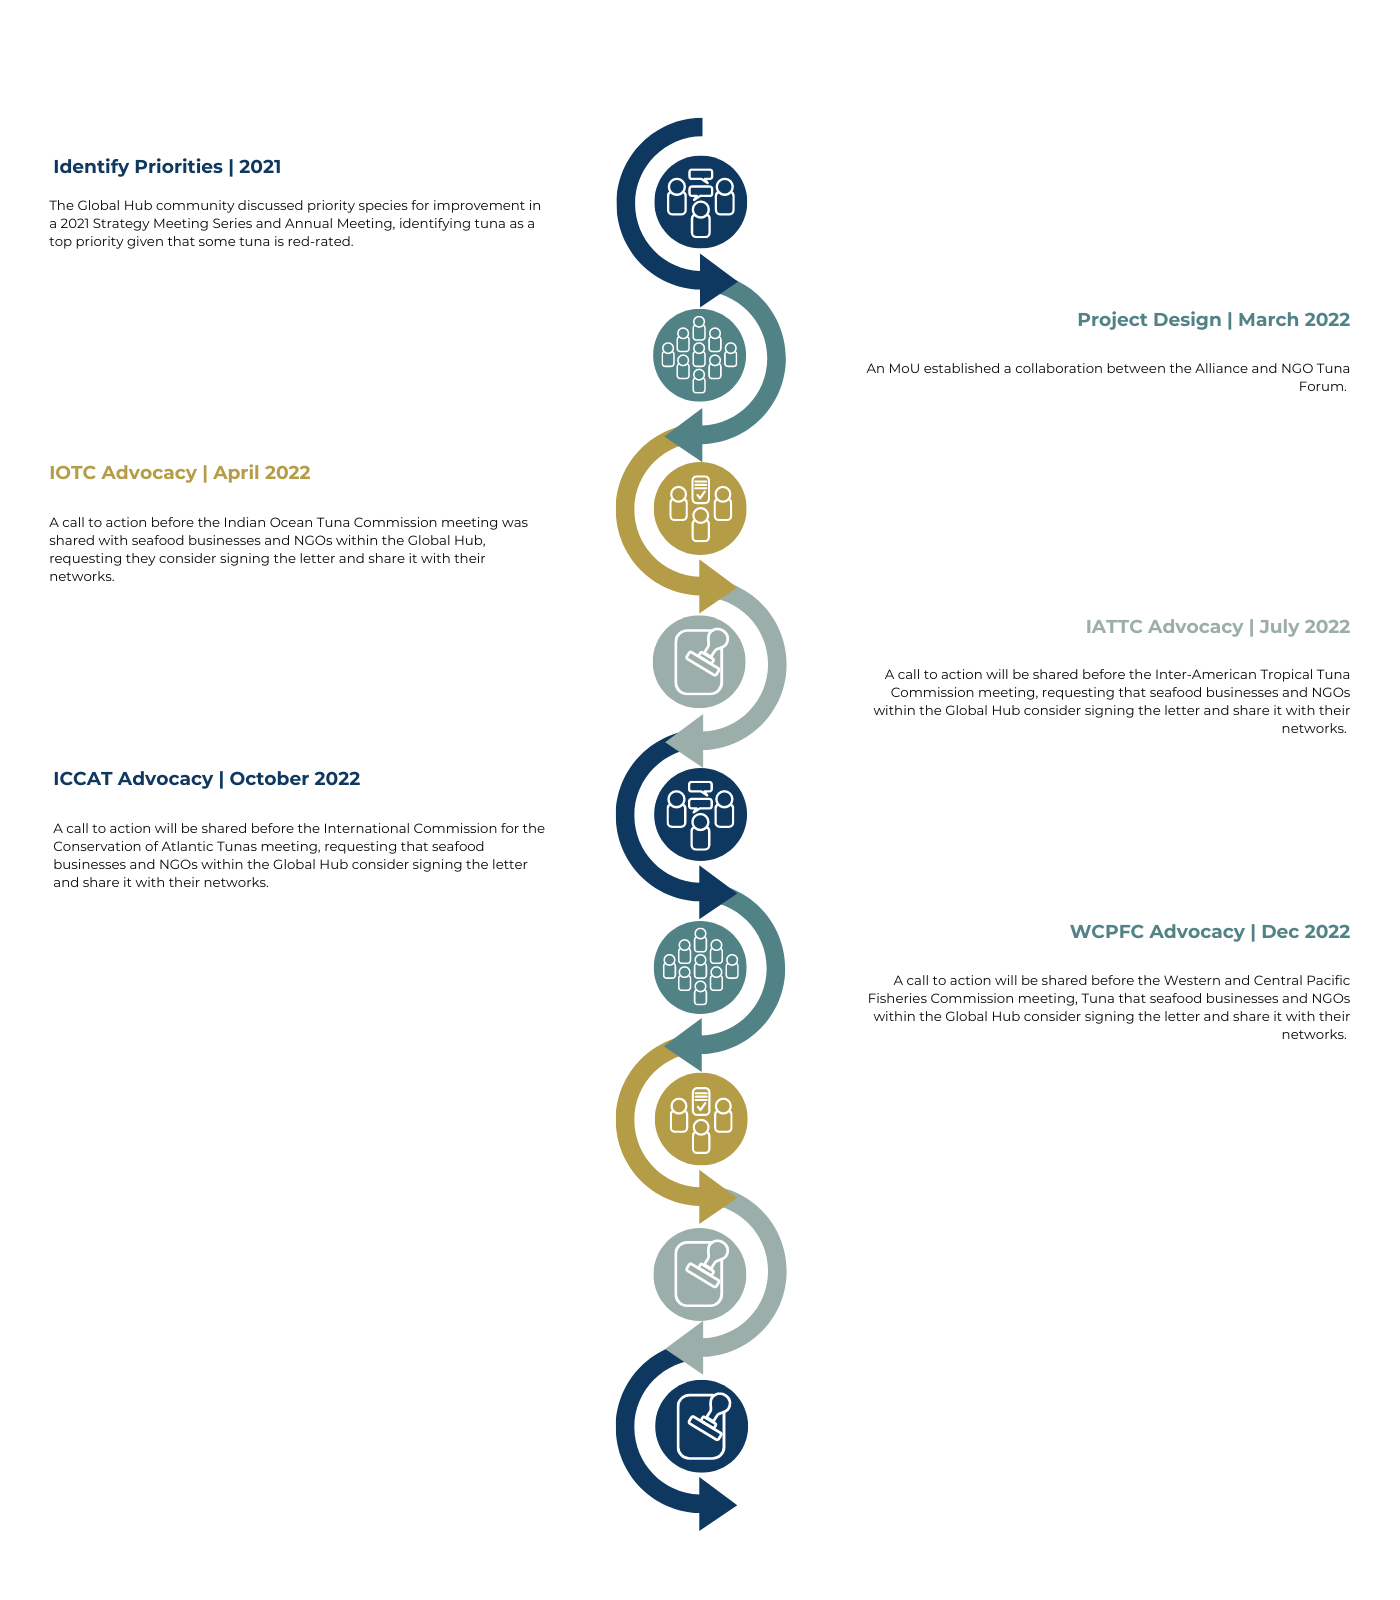 Project Timeline for the Alliance's Advocacy for Tuna project